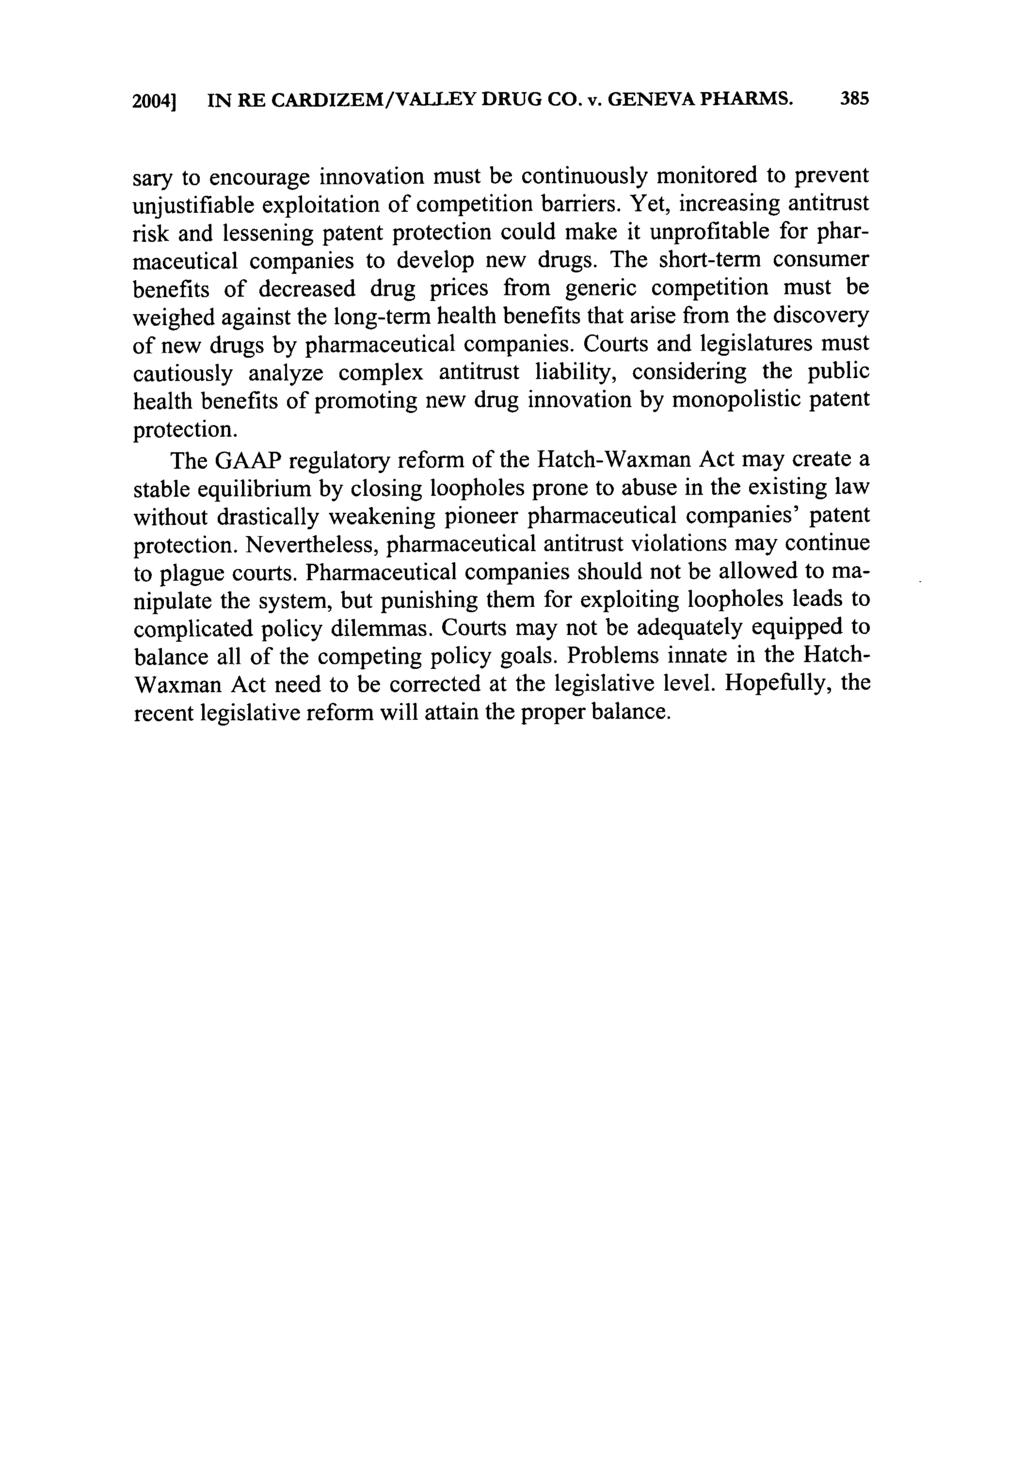 2004] IN RE CARDIZEM/VALLEY DRUG CO. v. GENEVA PHARMS. 385 sary to encourage innovation must be continuously monitored to prevent unjustifiable exploitation of competition barriers.